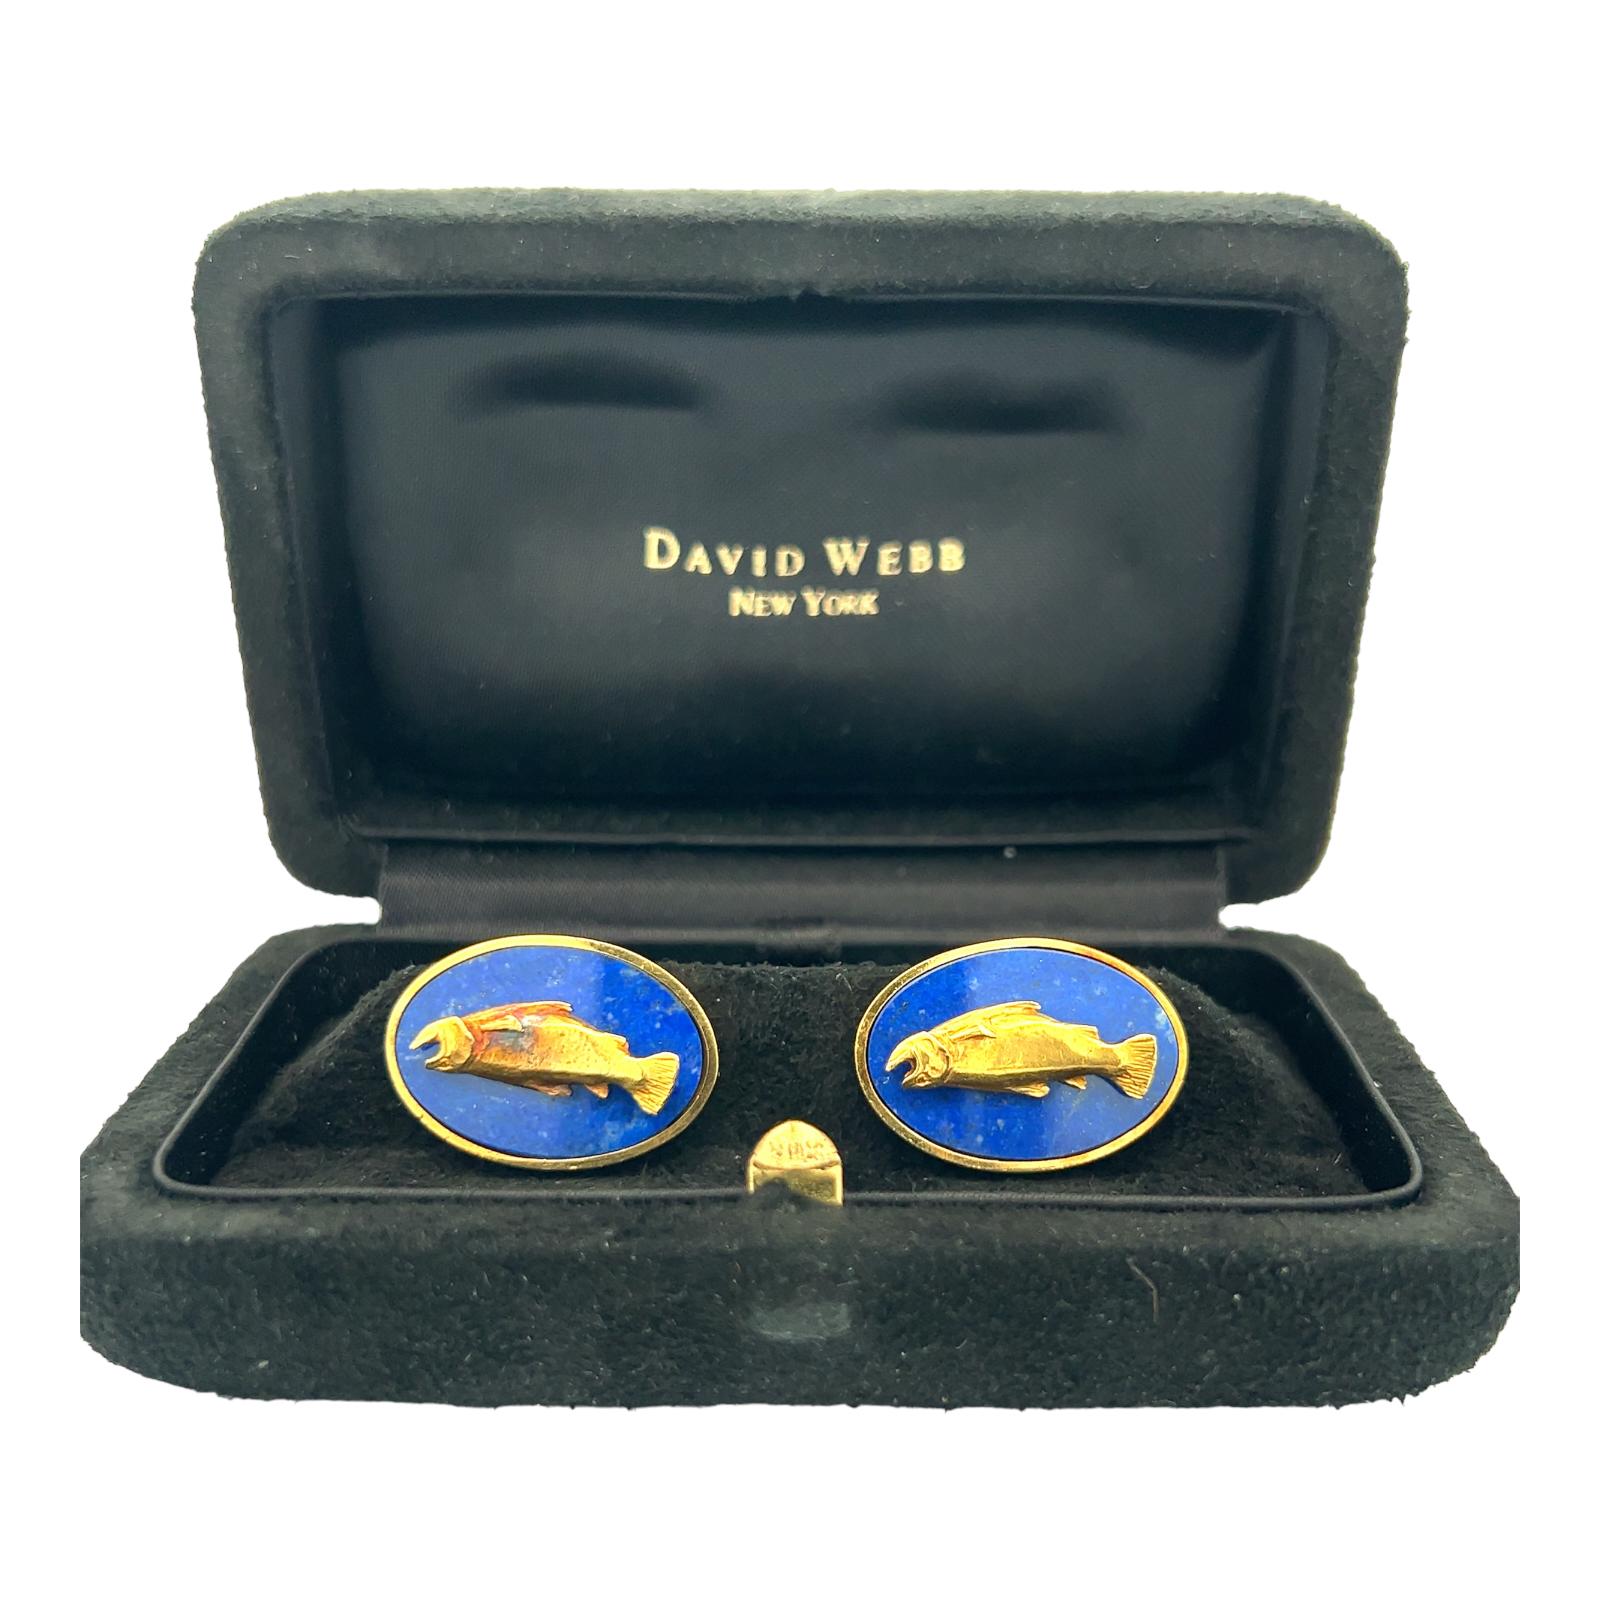 David Webb cufflinks crafted in 18 karat yellow gold. The oval gold cufflinks features lapis lazuli gemstone inlay and gold textured fish. The cufflinks measure 20 x 25mm and are signed Webb 18K. Come in original box.  The cufflinks  have not been